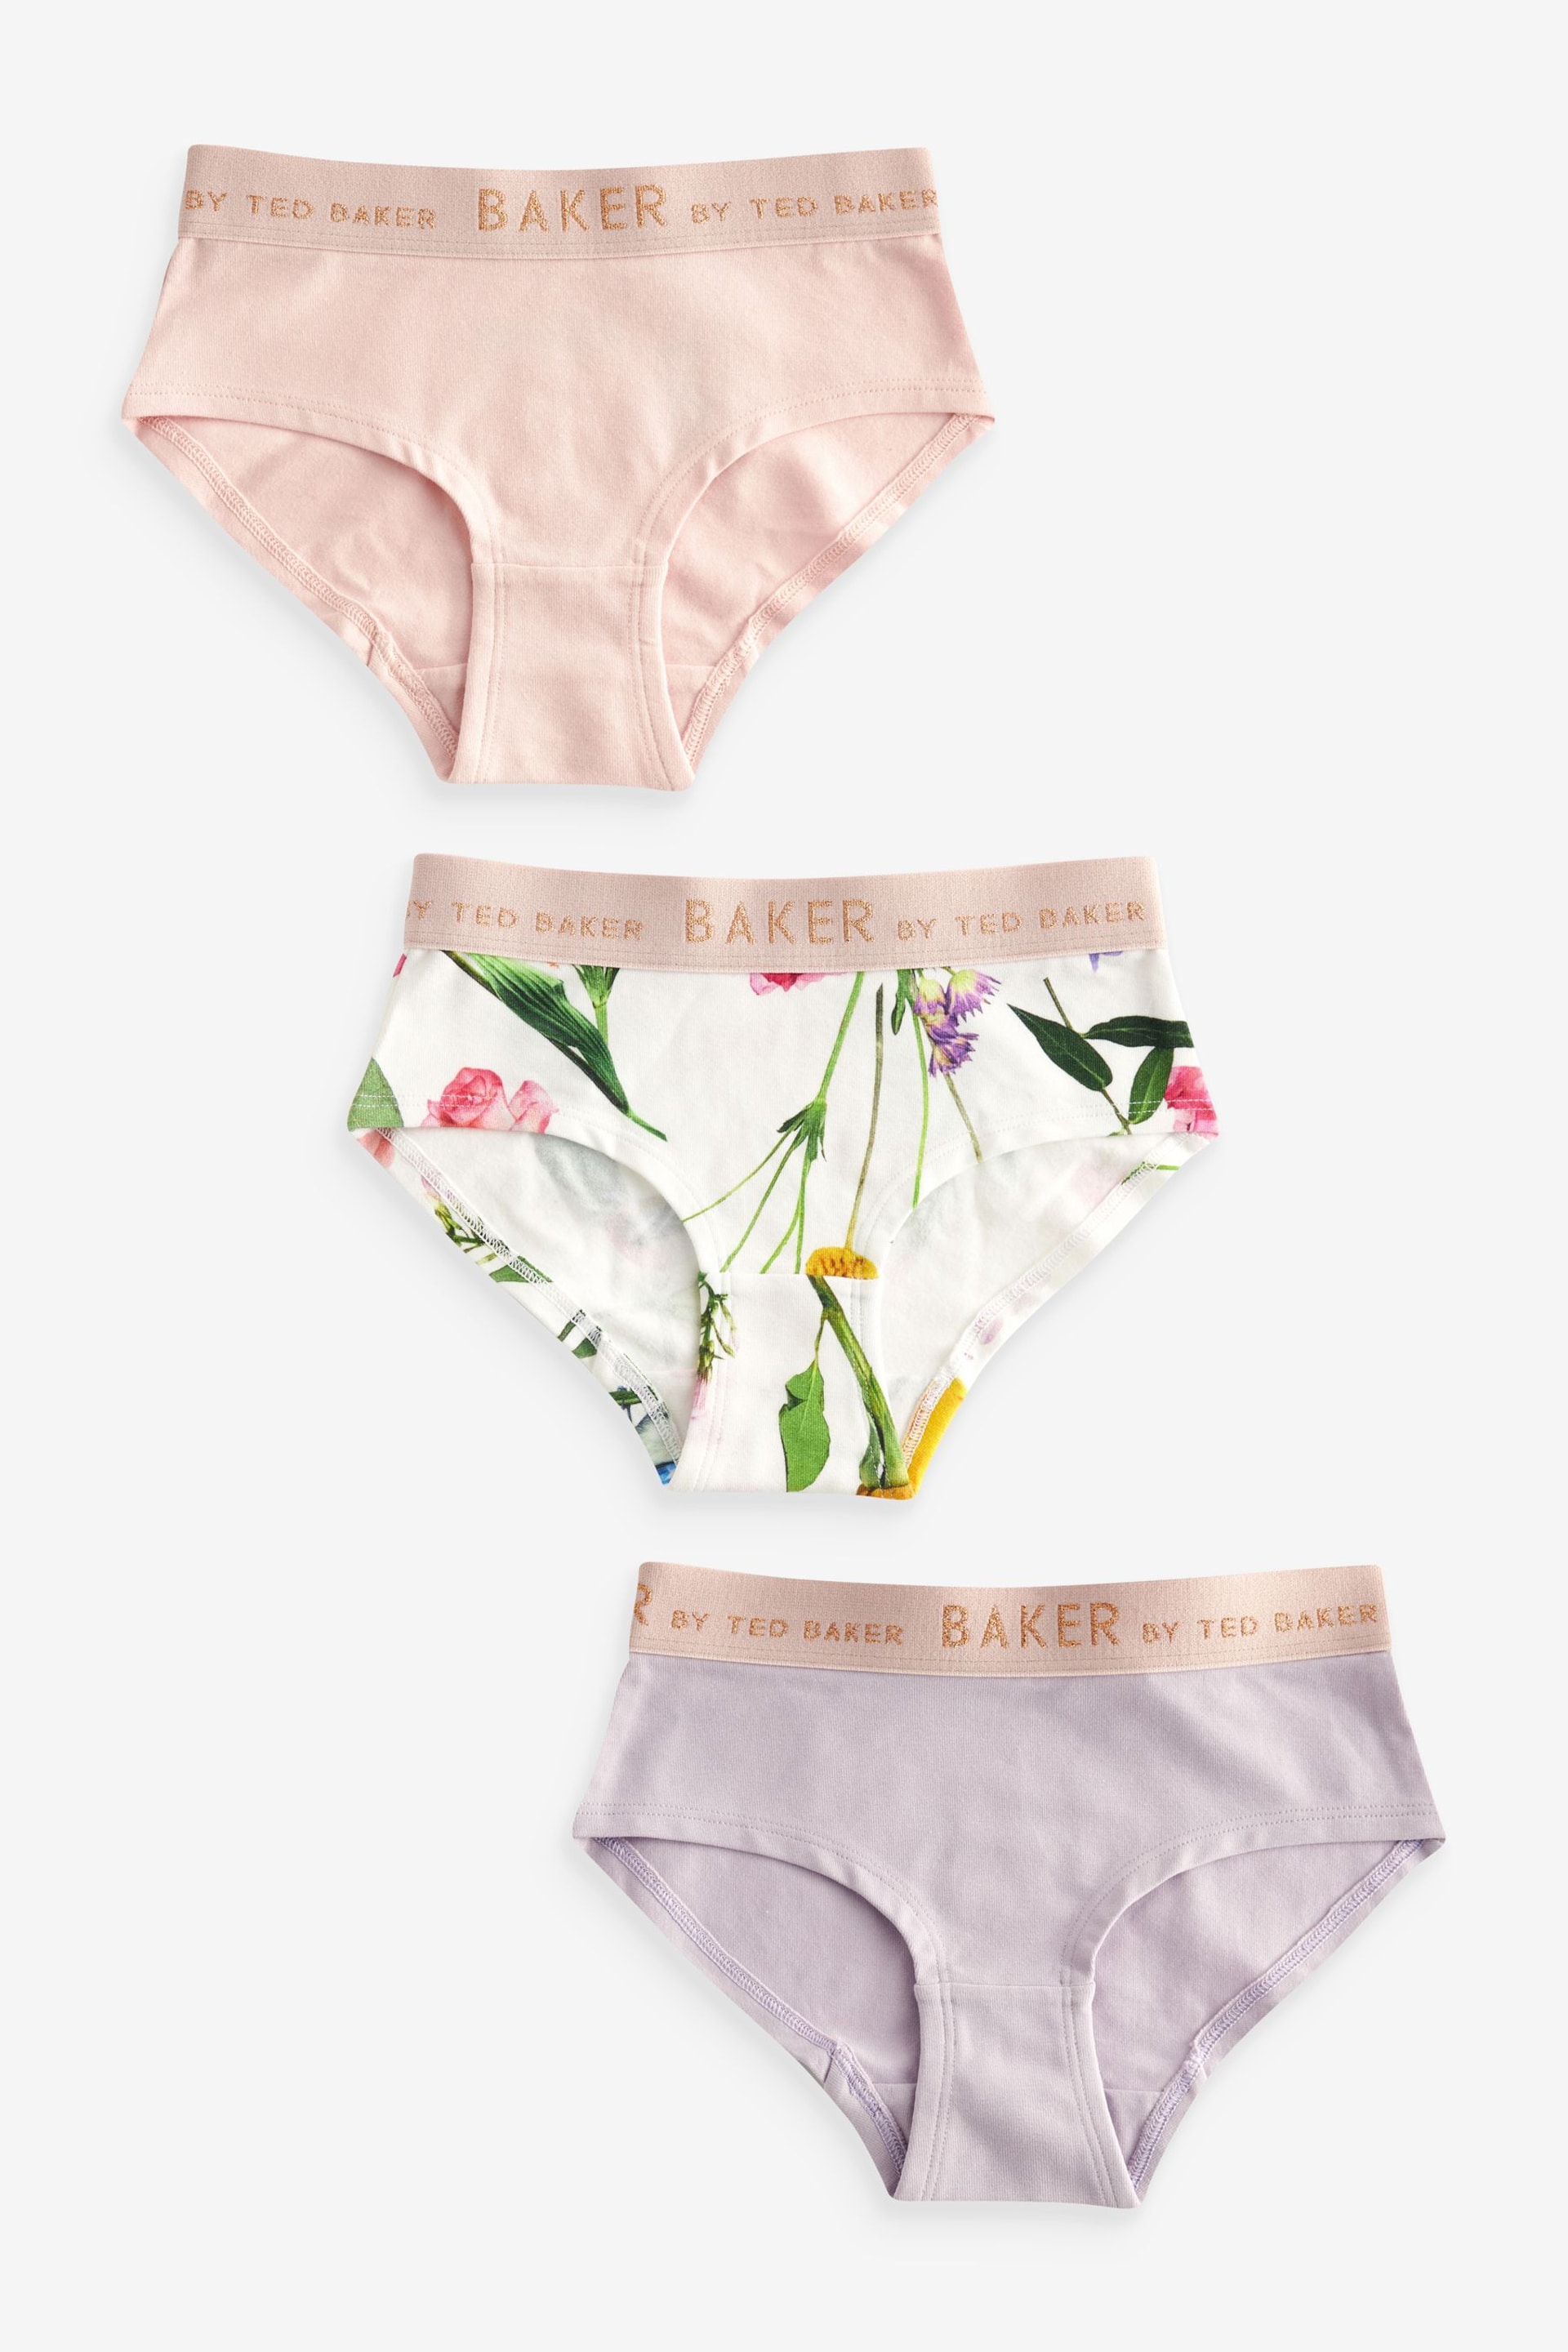 Baker by Ted Baker Briefs 3 Pack - Image 1 of 6